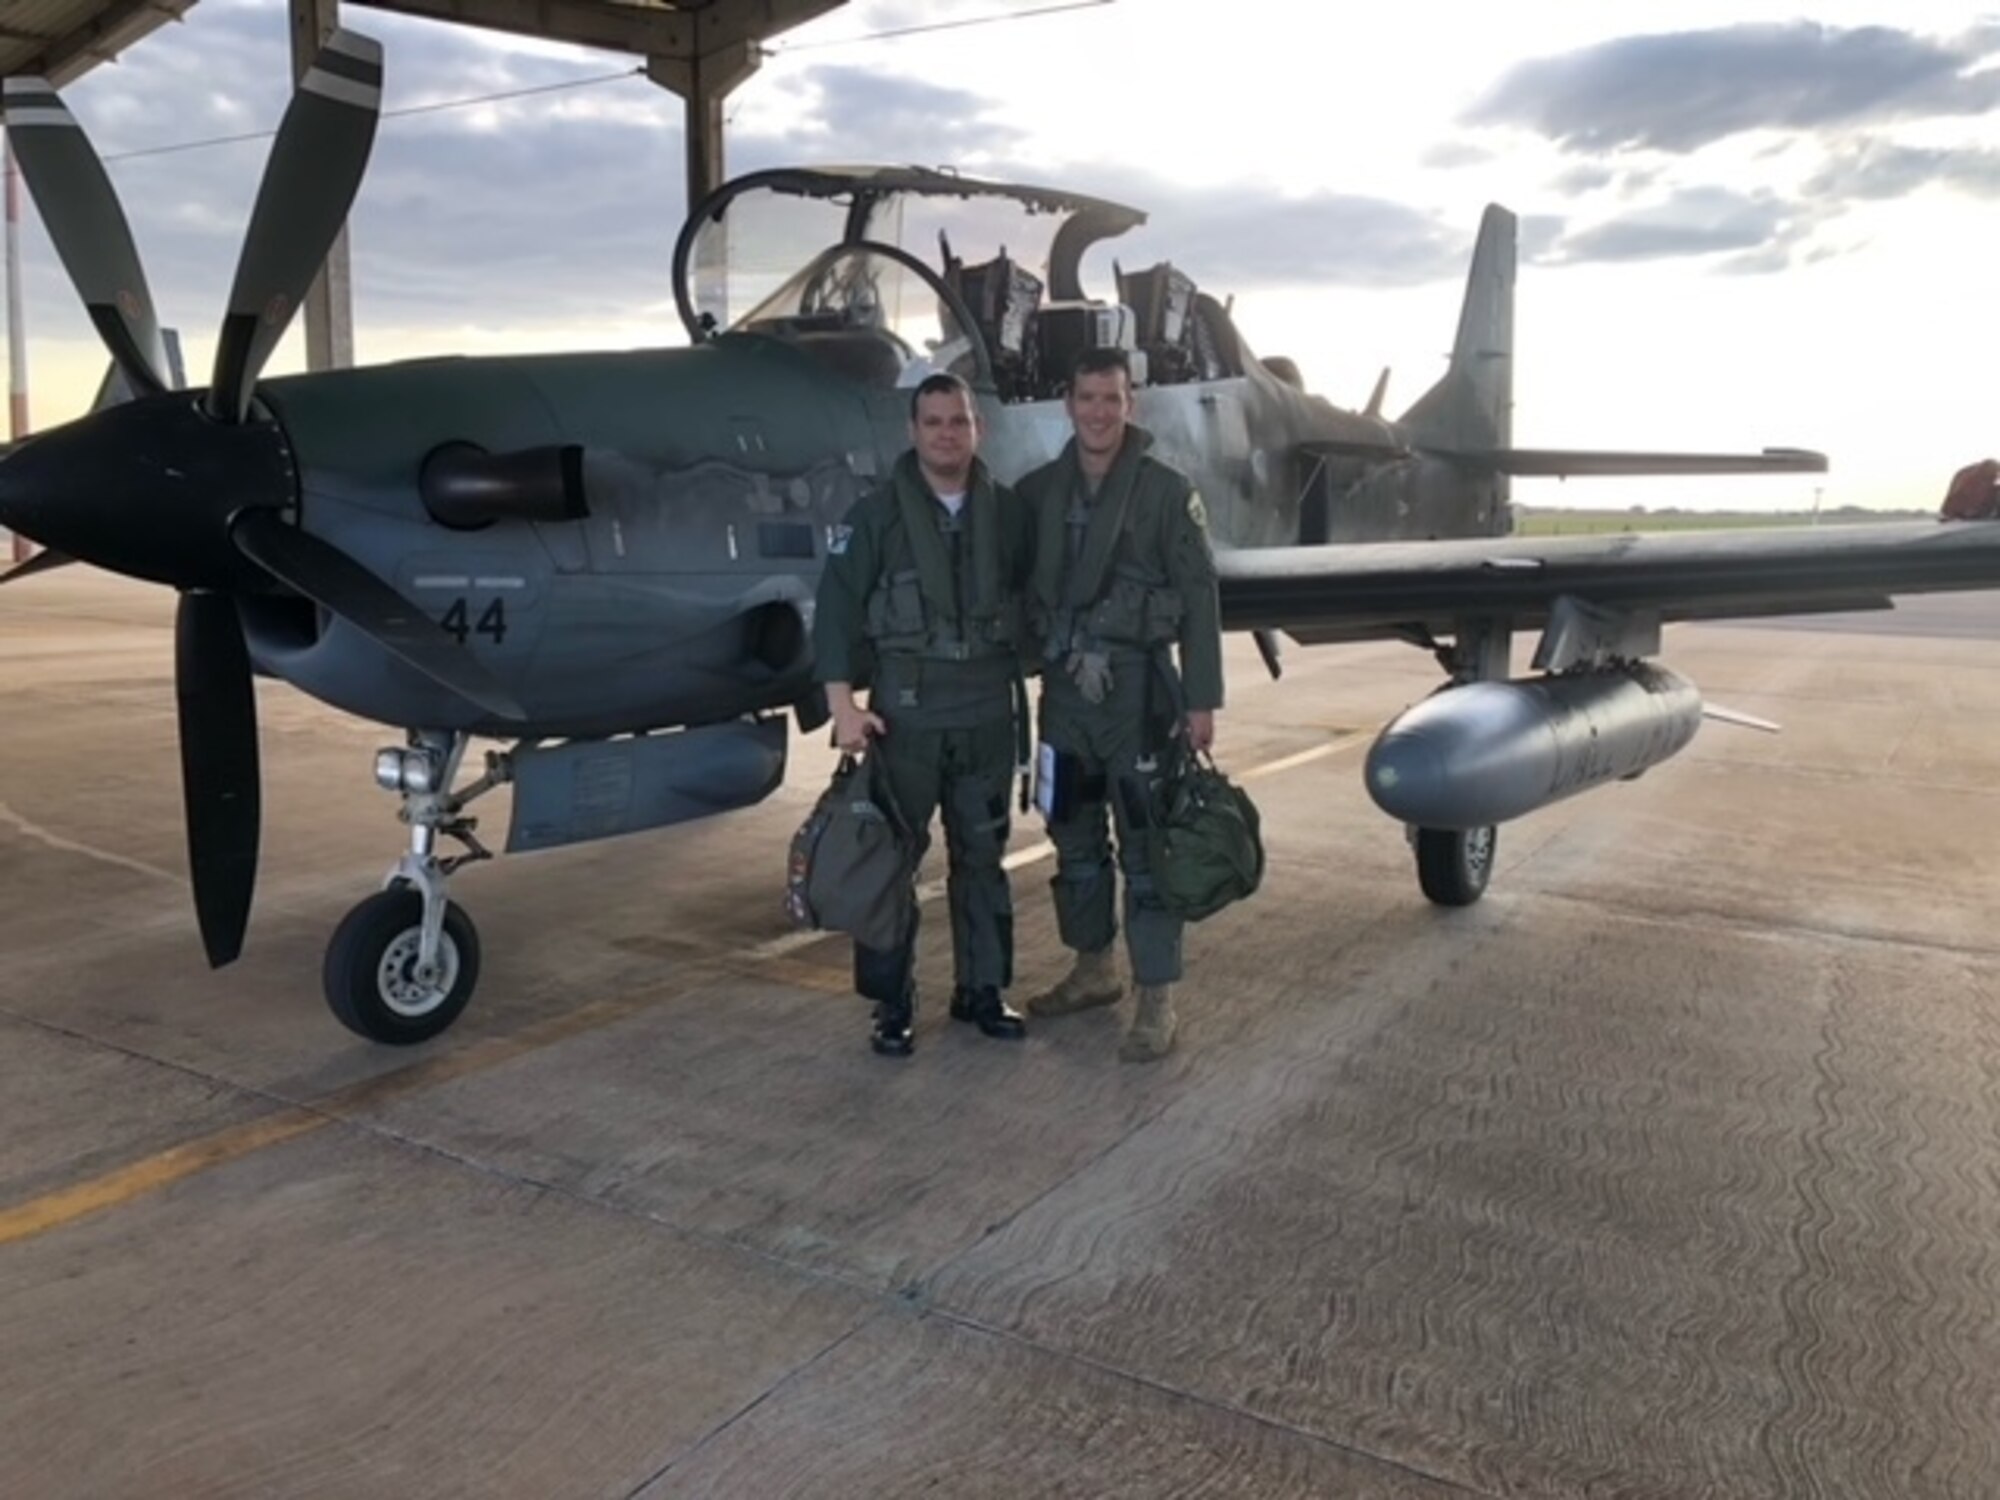 U.S. Air Force Lt. Col. Daniel Griffin, an A-10C Thunderbolt II pilot assigned to the 104th Fighter Squadron, Maryland Air National Guard, poses for a photograph with a pilot from the Brazilian Air Force during Exercise Tapio in Campo Grande, Brazil, August 24, 2022.